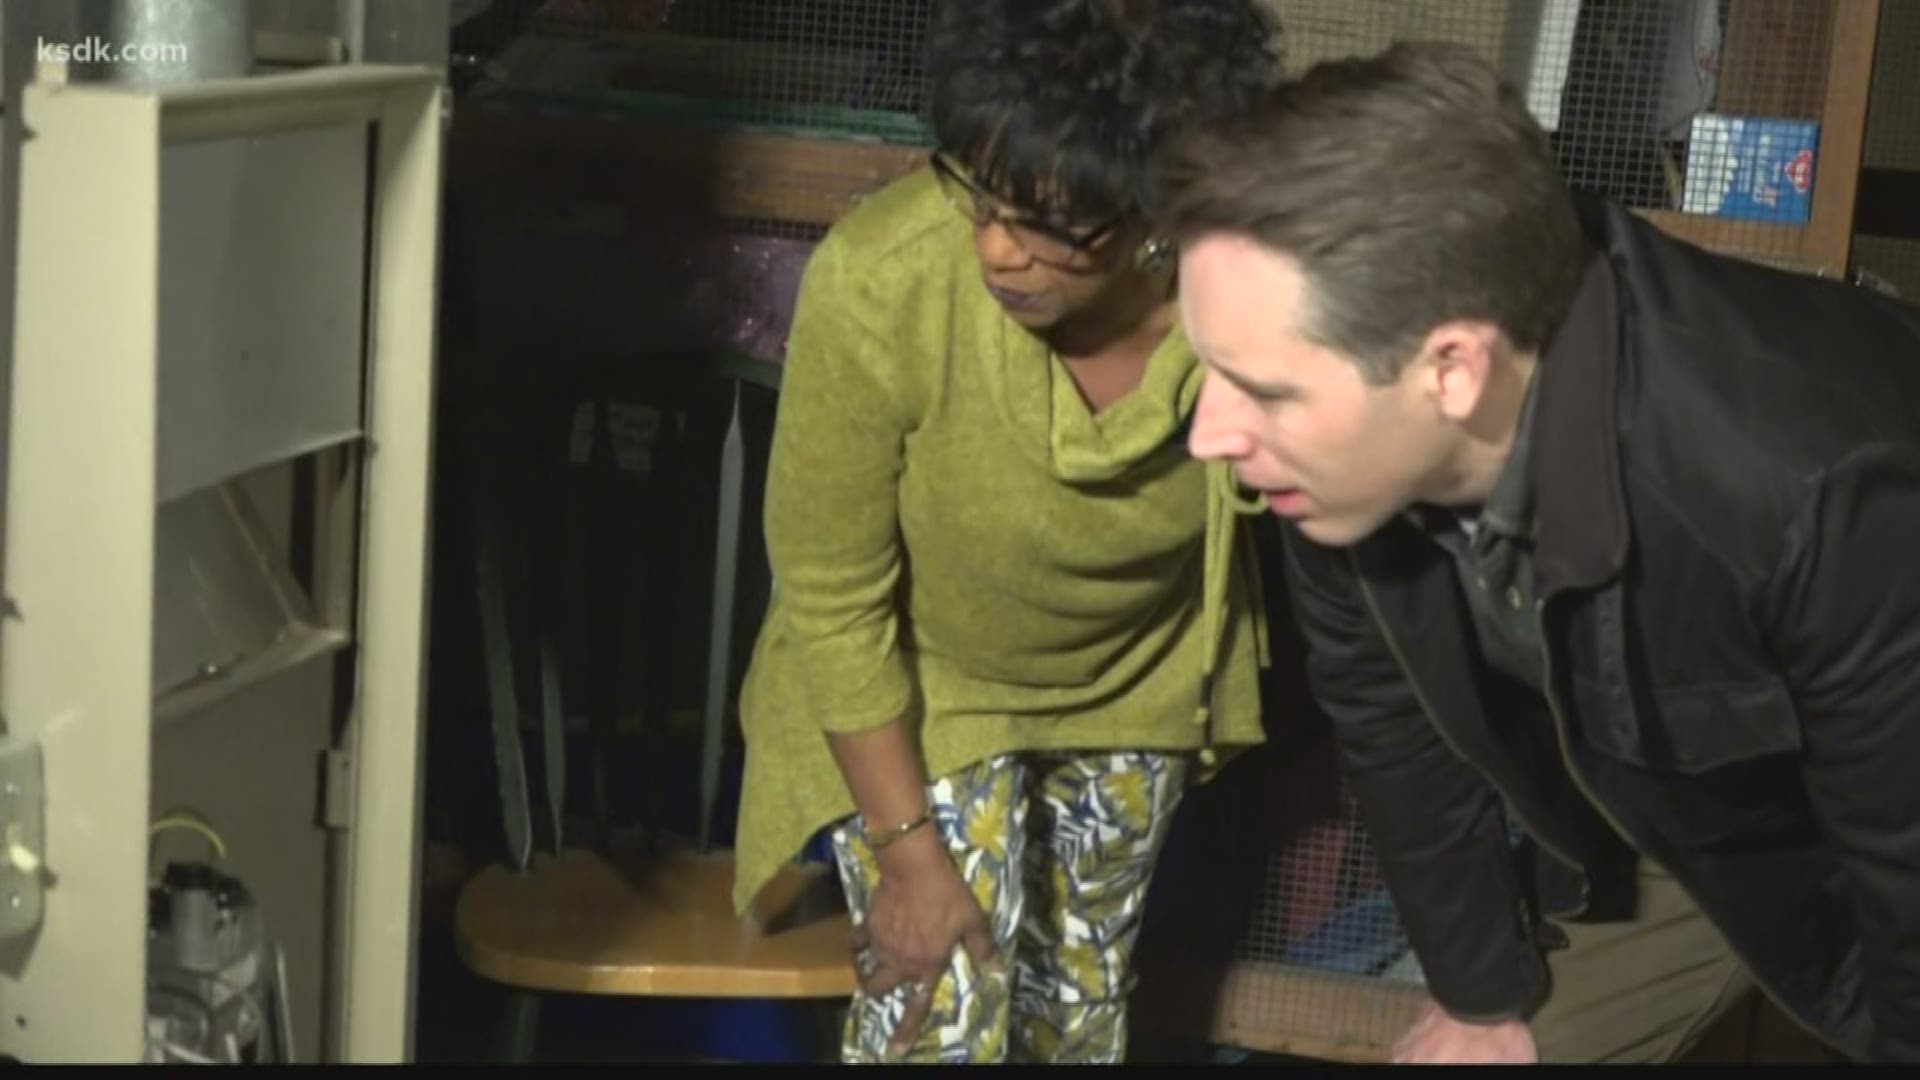 Residents complaints of no water, sewage issues, trash and more prompting U.S. Senator Josh Hawley to tour the apartments and speak to residents one on one.